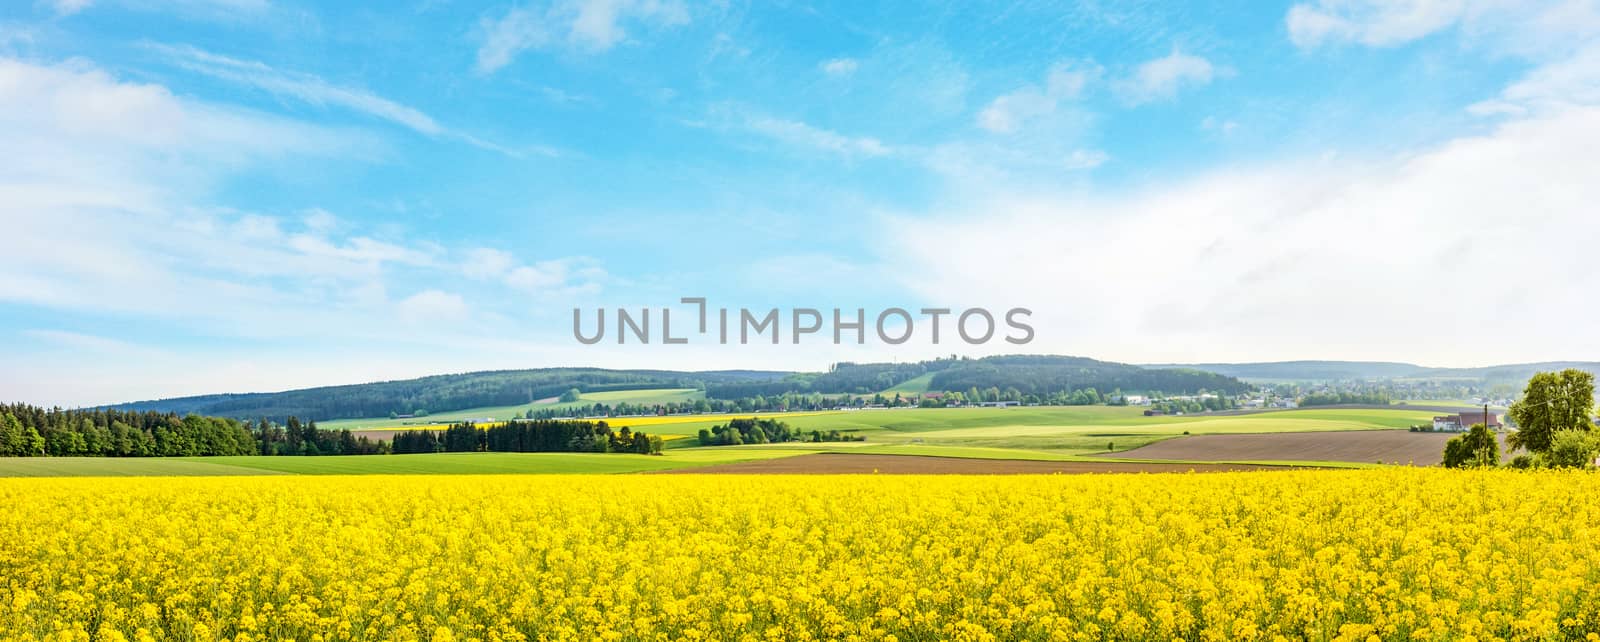 yellow canola field panorama with forest / trees and rural landscape in the background